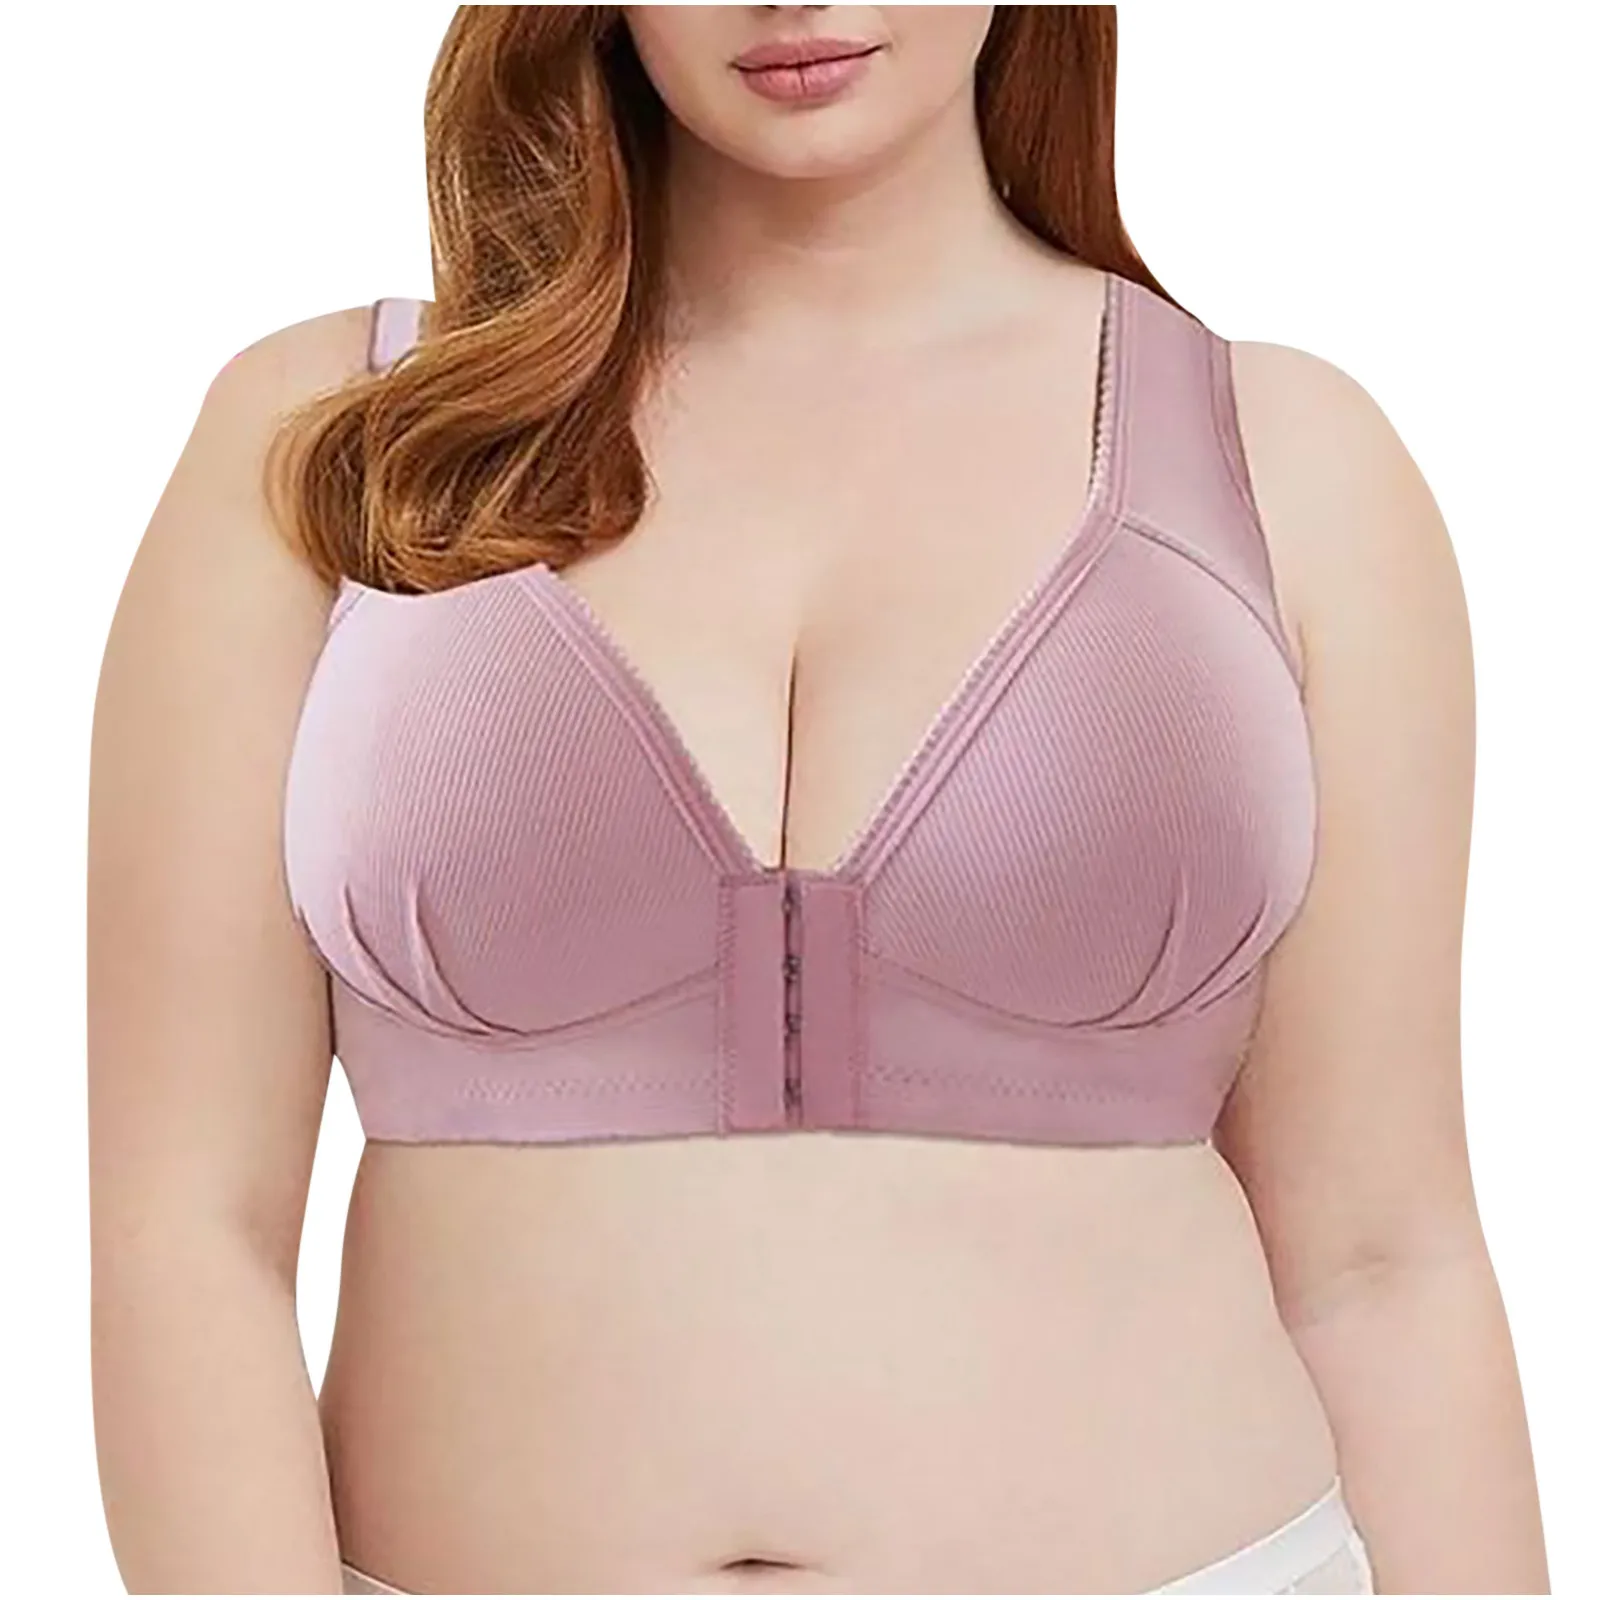 Bras for Women Front Closure Push Up Bras for Women Plus Size